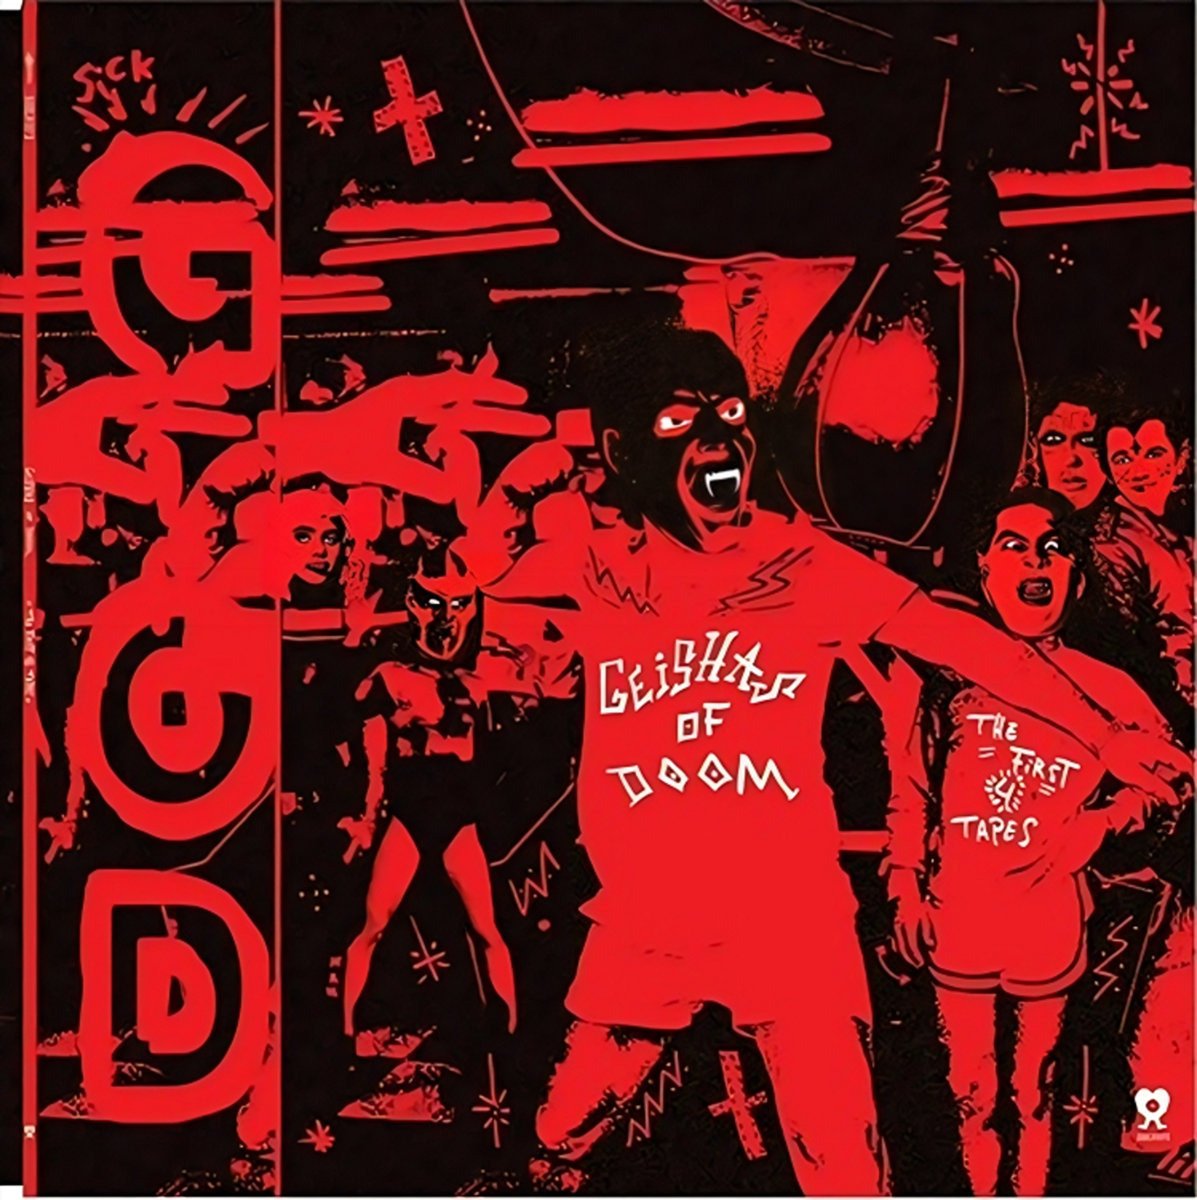 CD Shop - GEISHAS OF DOOM FIRST 4 TAPES